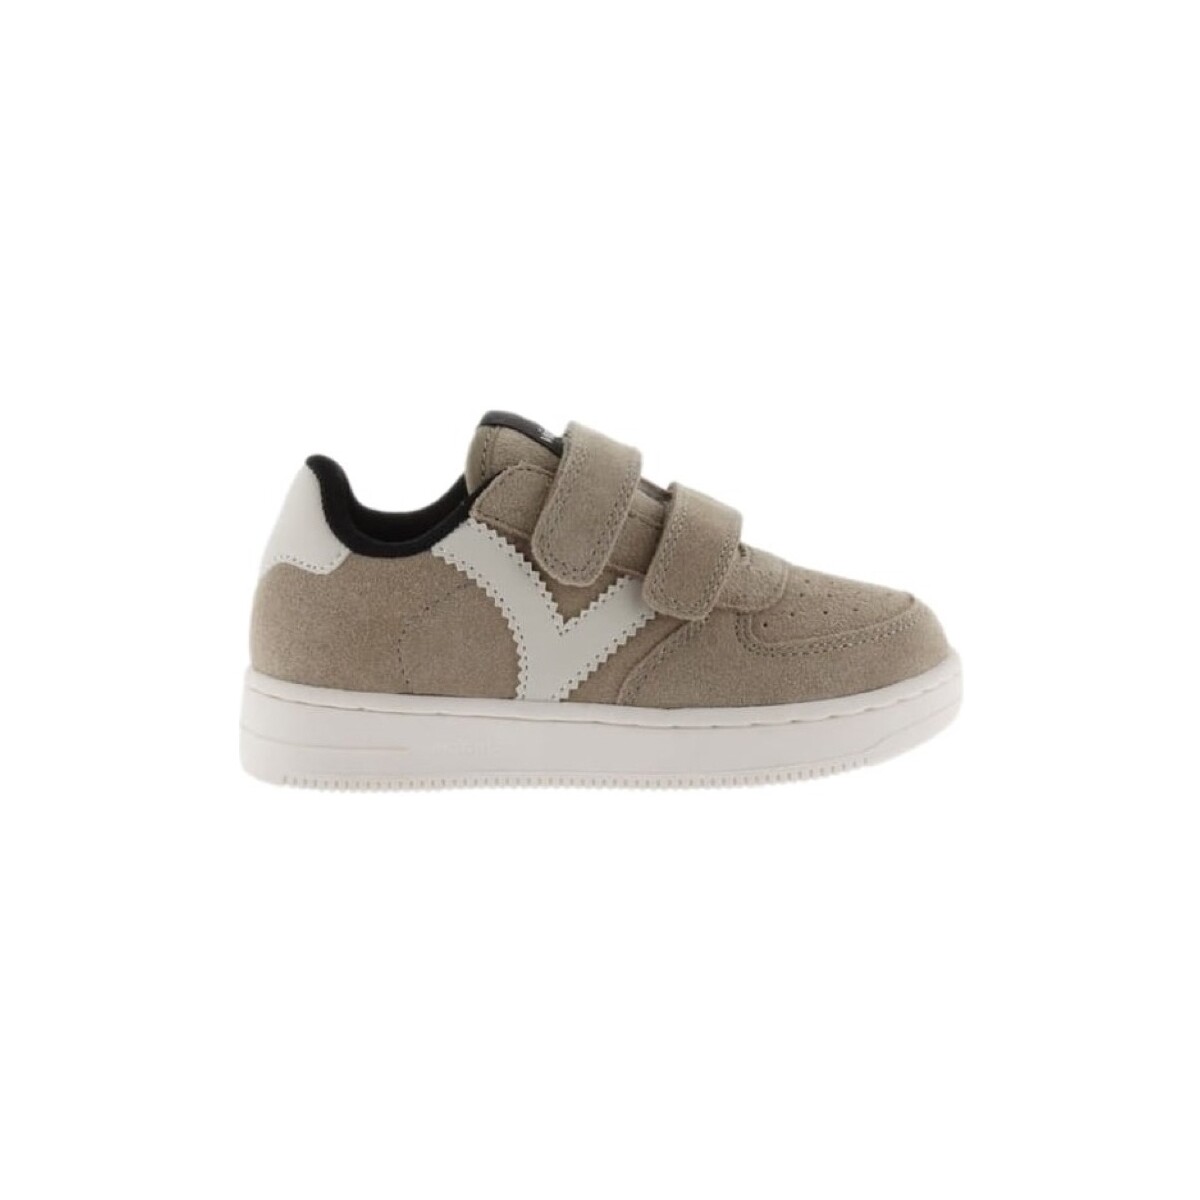 Sneakers Victoria Kids 124115 – Taupe